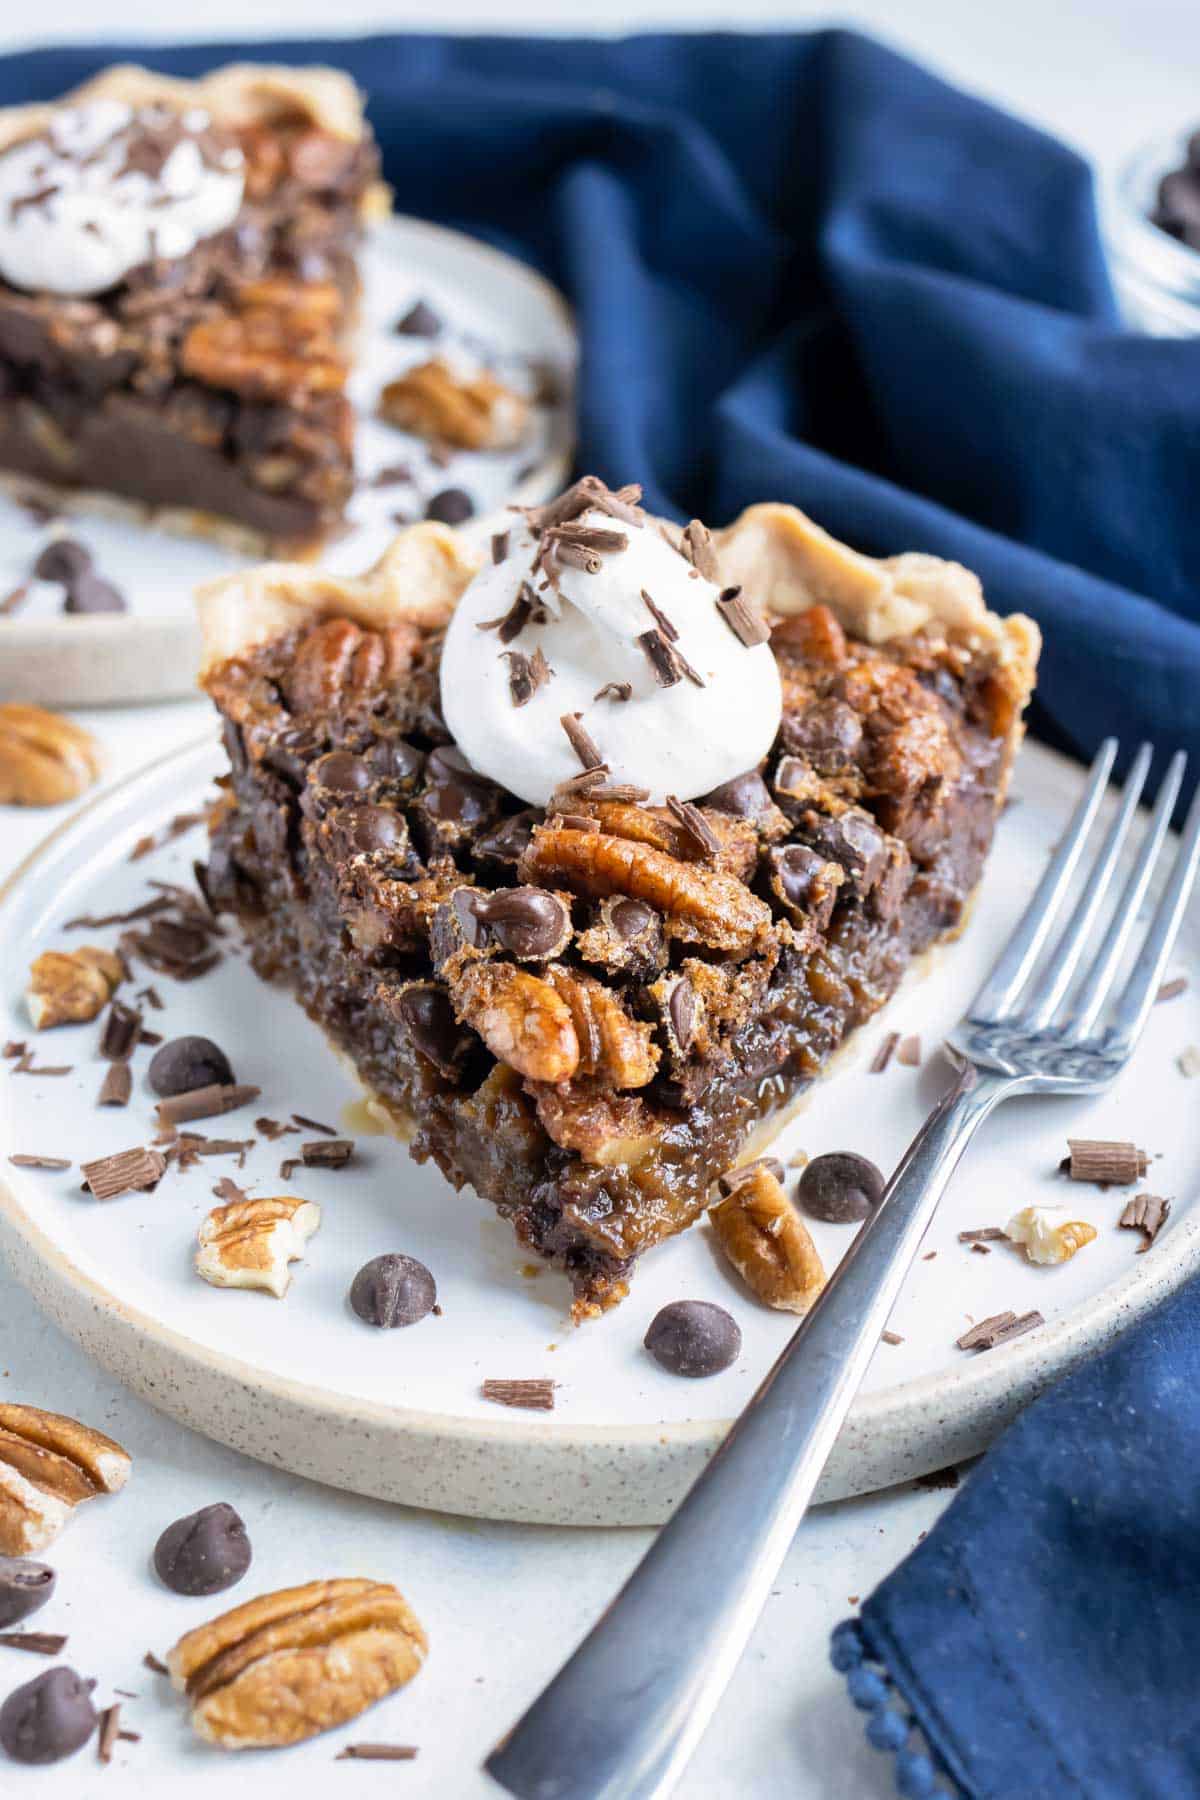 Gluten-free pecan pie is served with a fork on a plate.